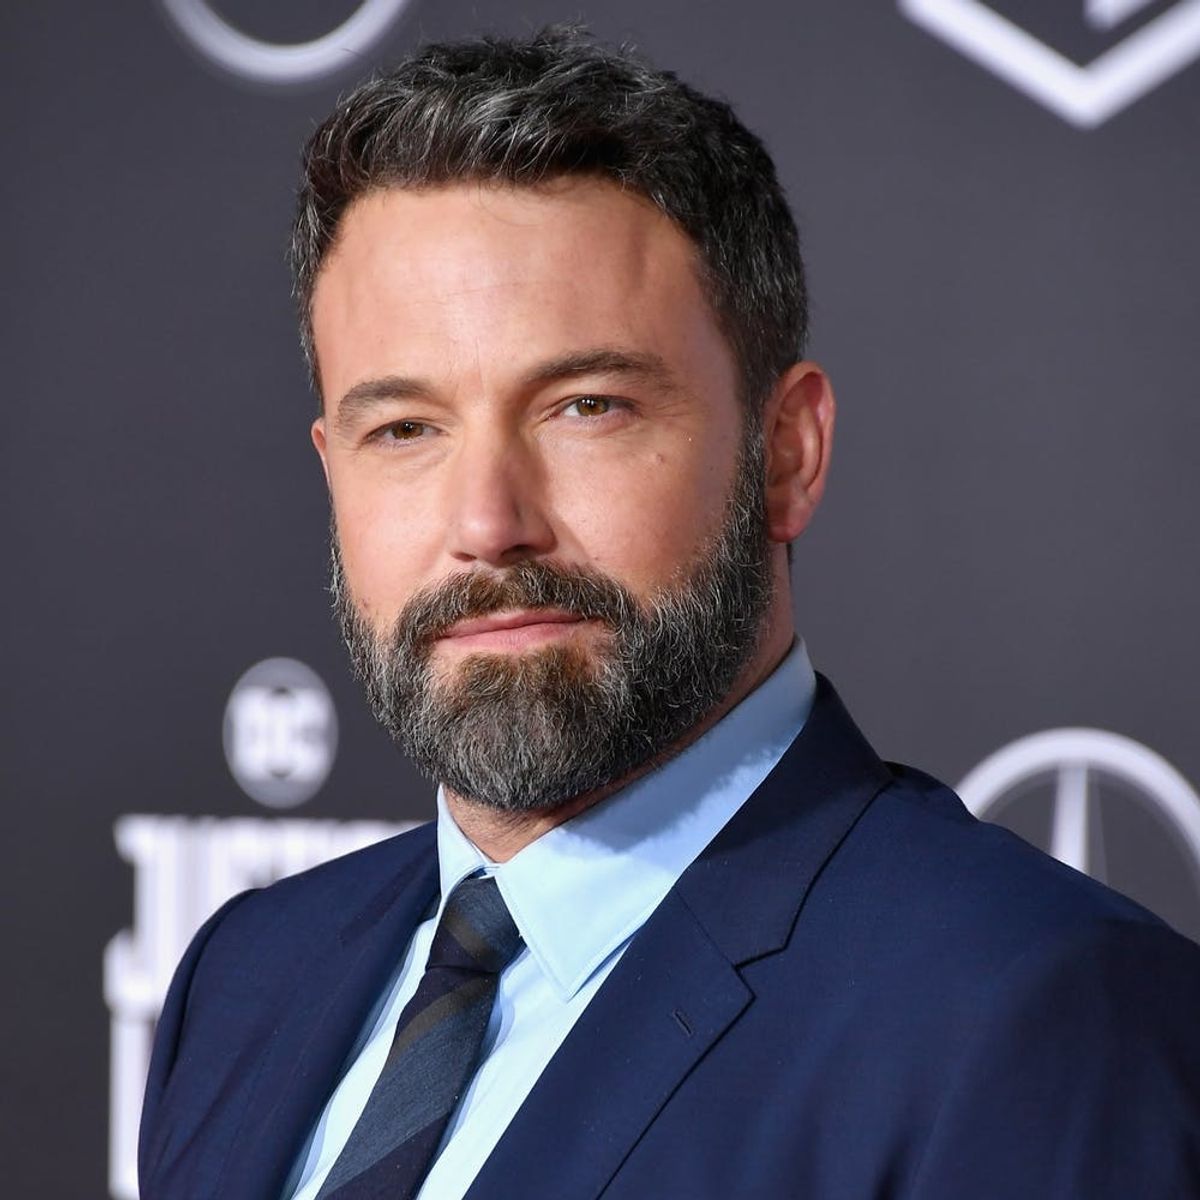 Stephen Colbert Questions Ben Affleck on Sexual Misconduct Accusations